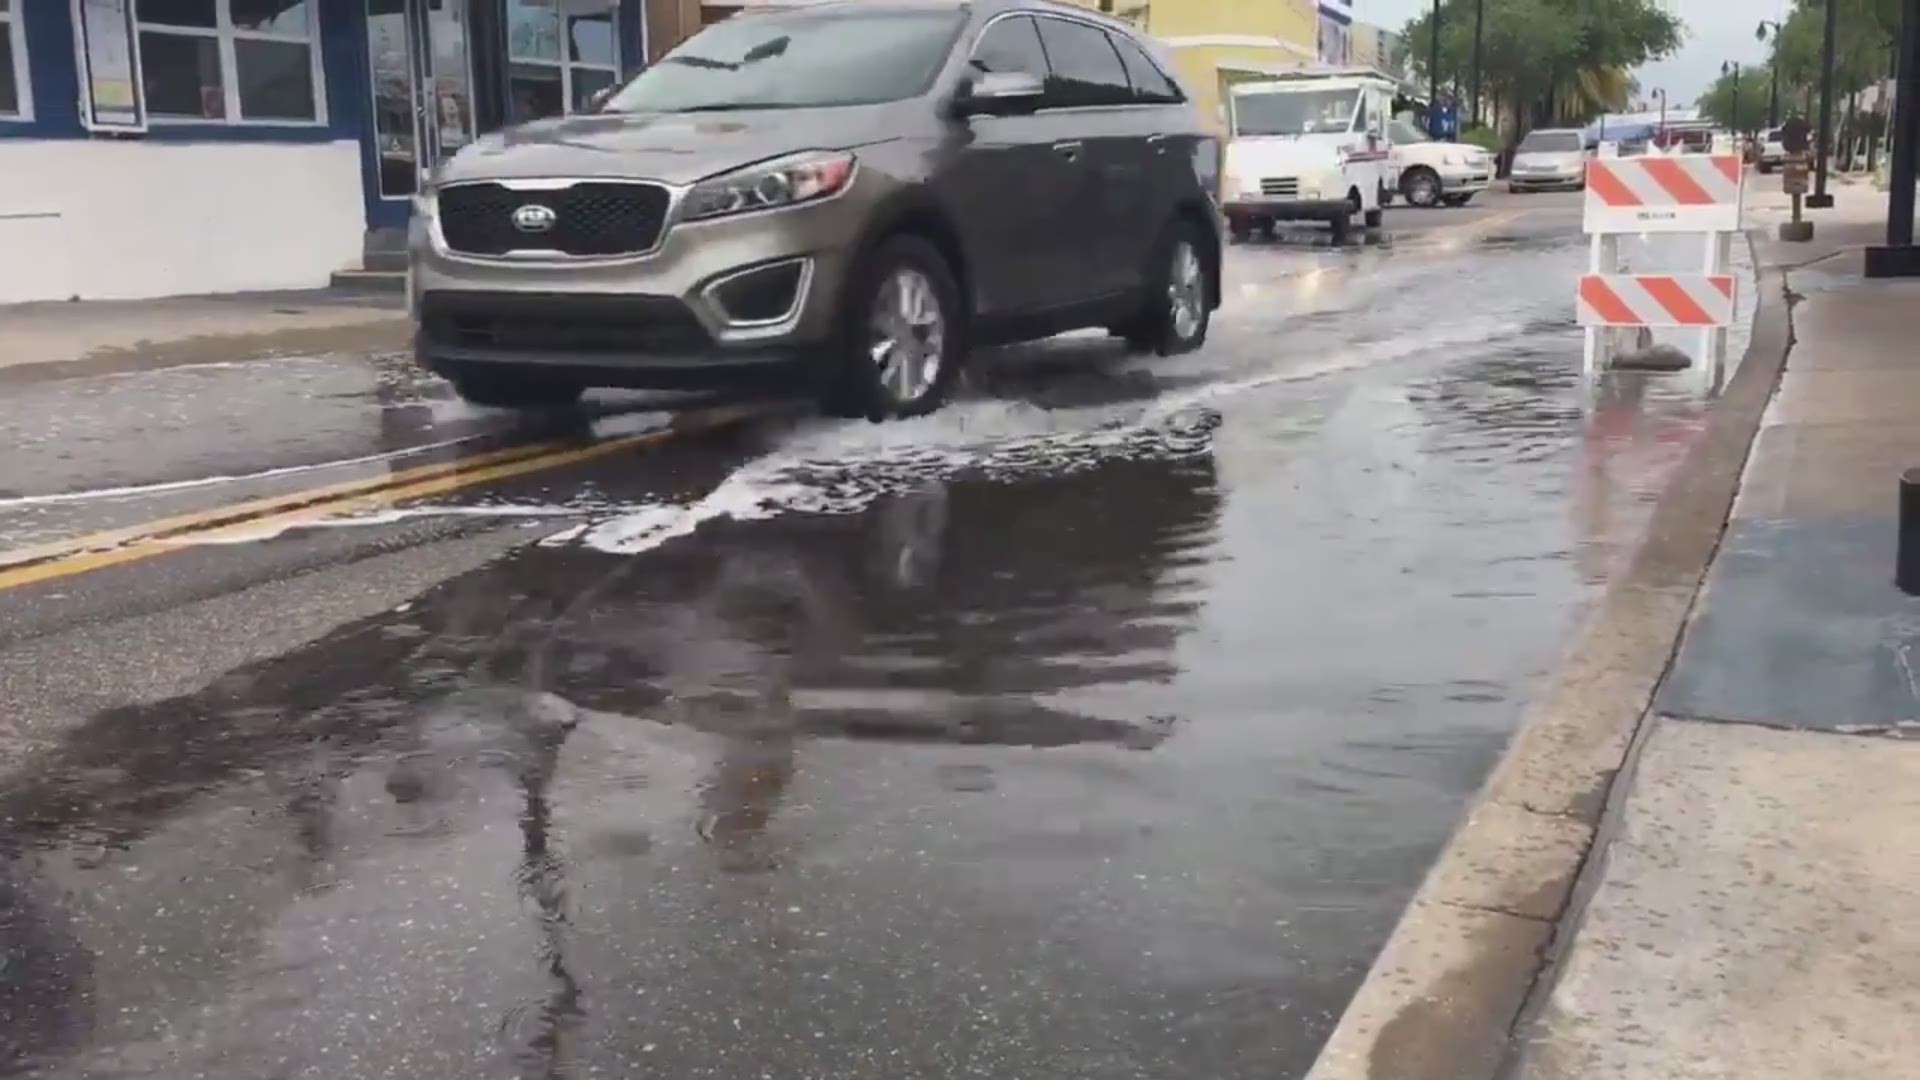 10News reporter Liz Crawford captured footage of pools of water beginning to form along Dodecanese Boulevard in Tarpon Springs. https://on.wtsp.com/2Va8NEd